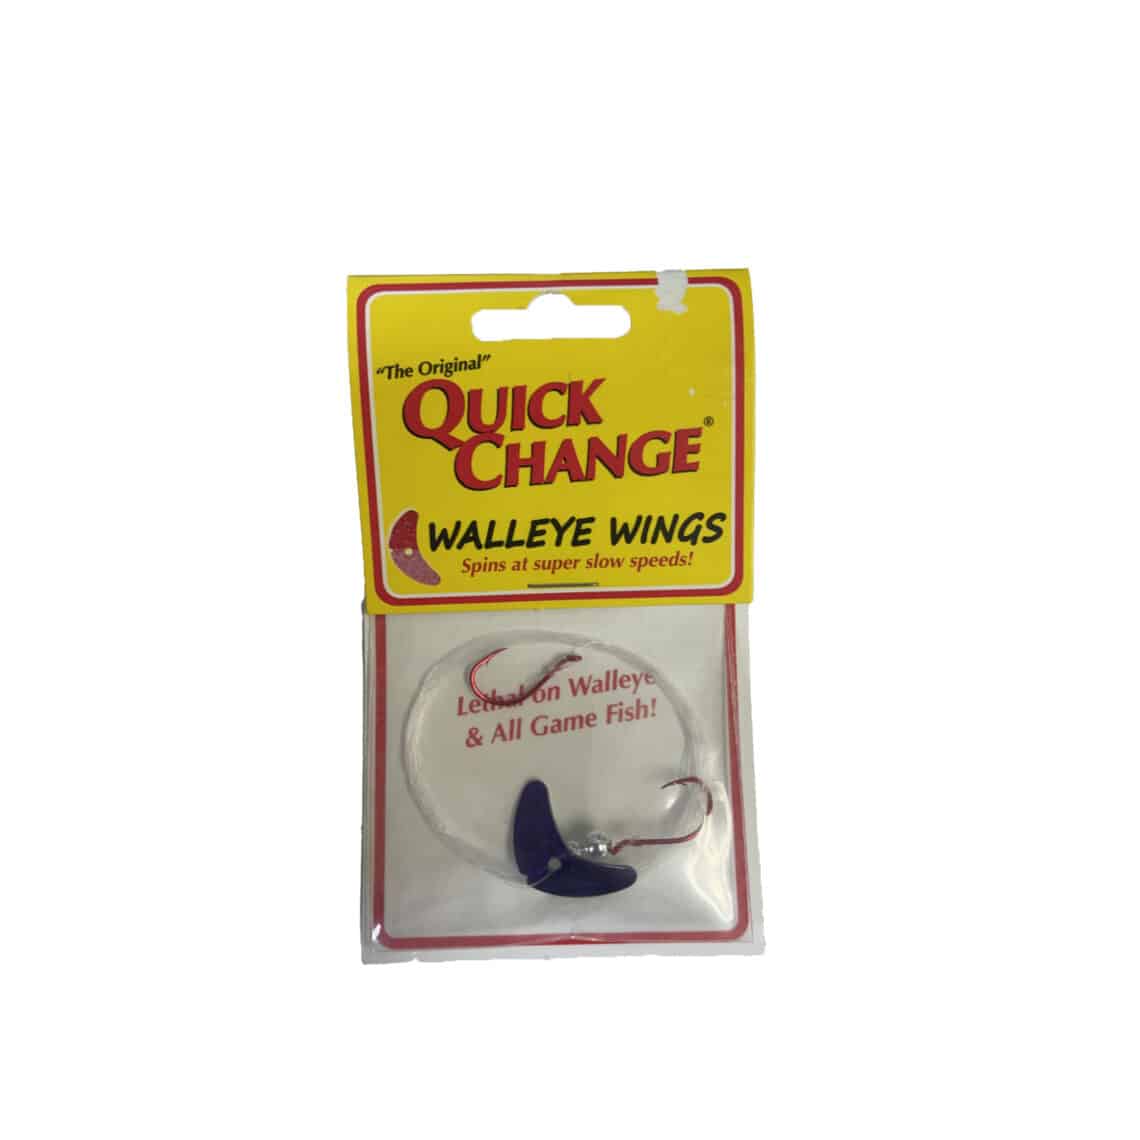 THE ORIGINAL QUICK DEATH - WALLEYE WINGS HARNESS RIG